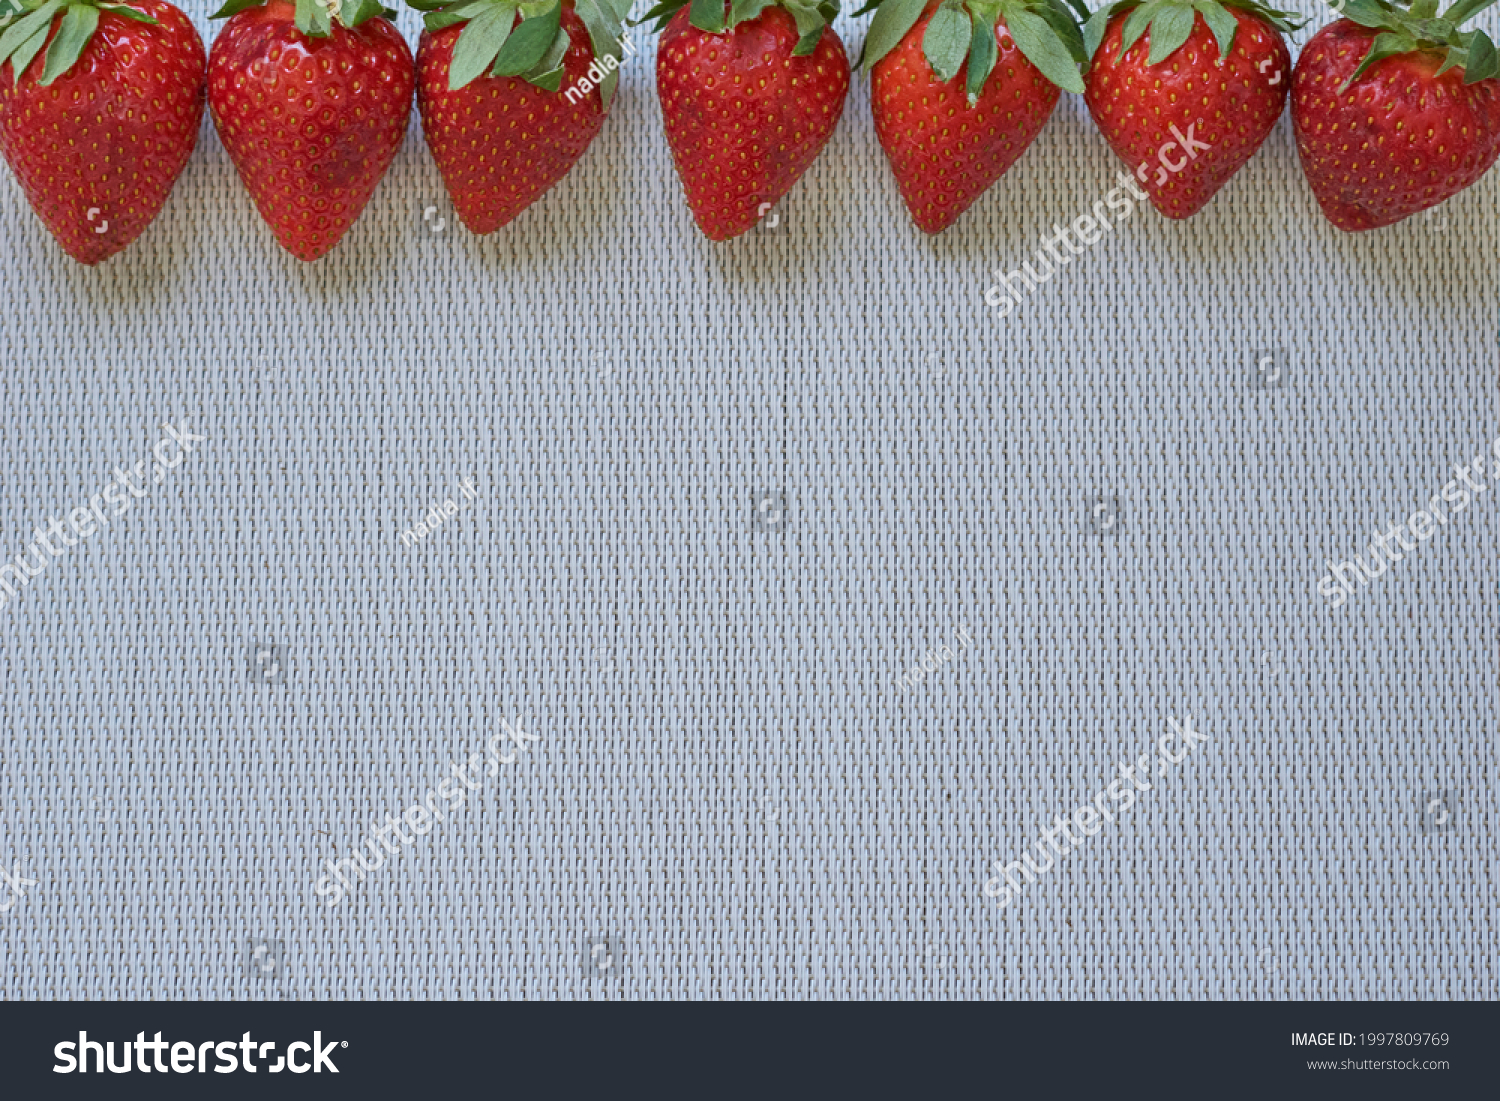 Fresh strawberries on white background, space for text. High quality photo #1997809769